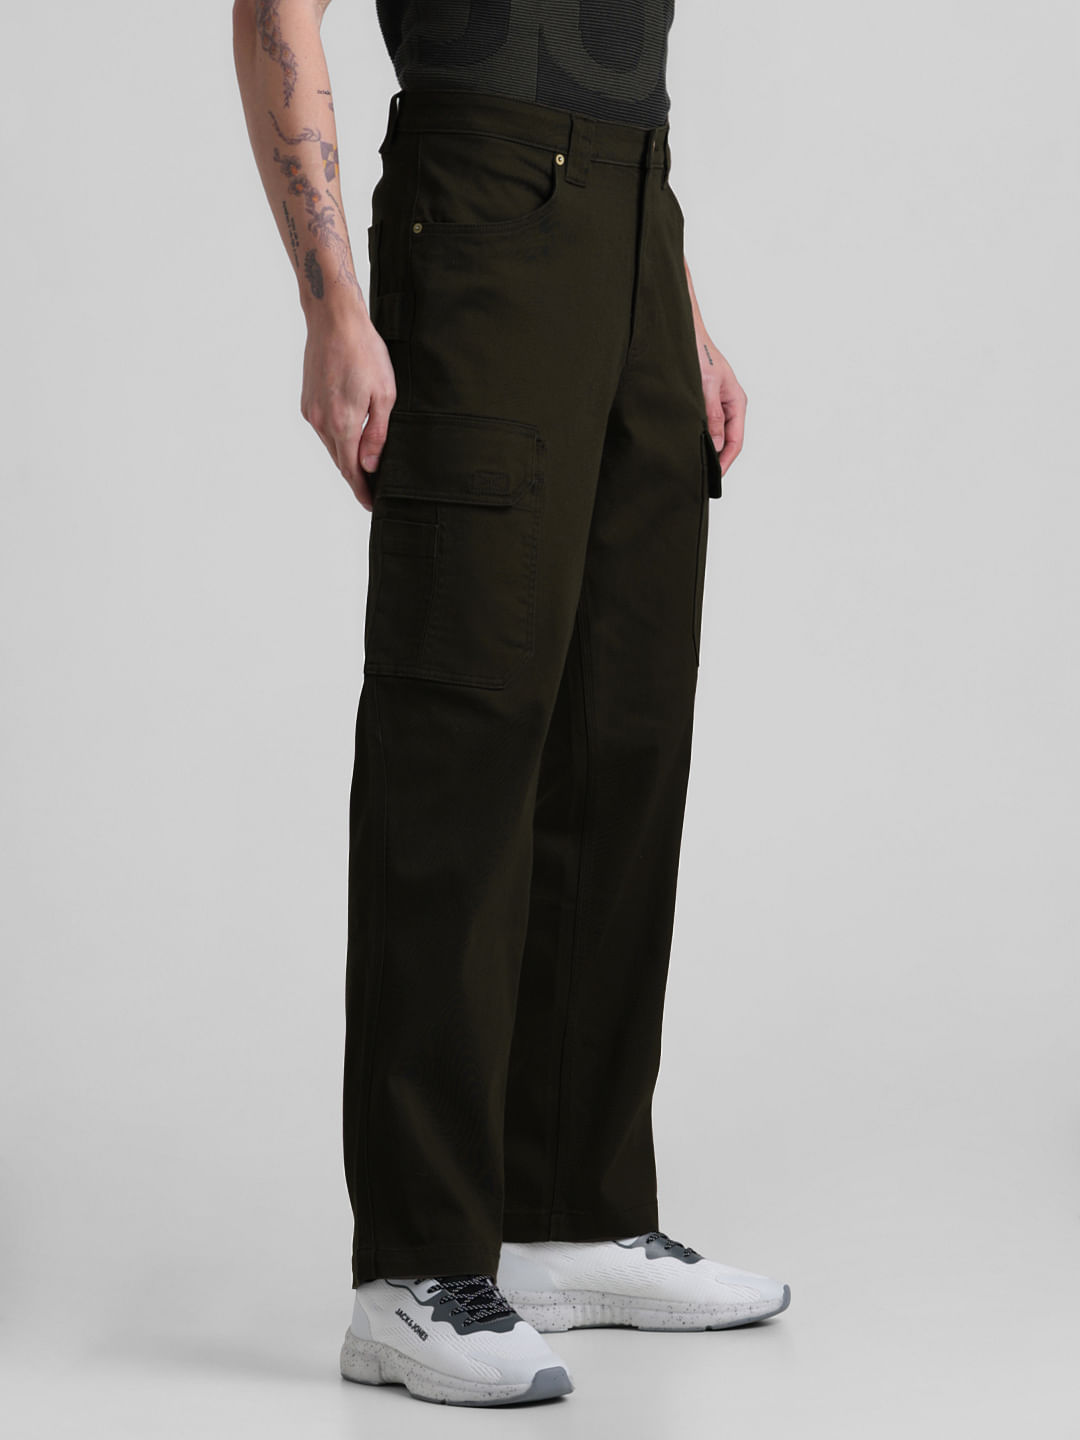 Cargo Pants Are Back—and They Look a Lot Better This Time Around | GQ